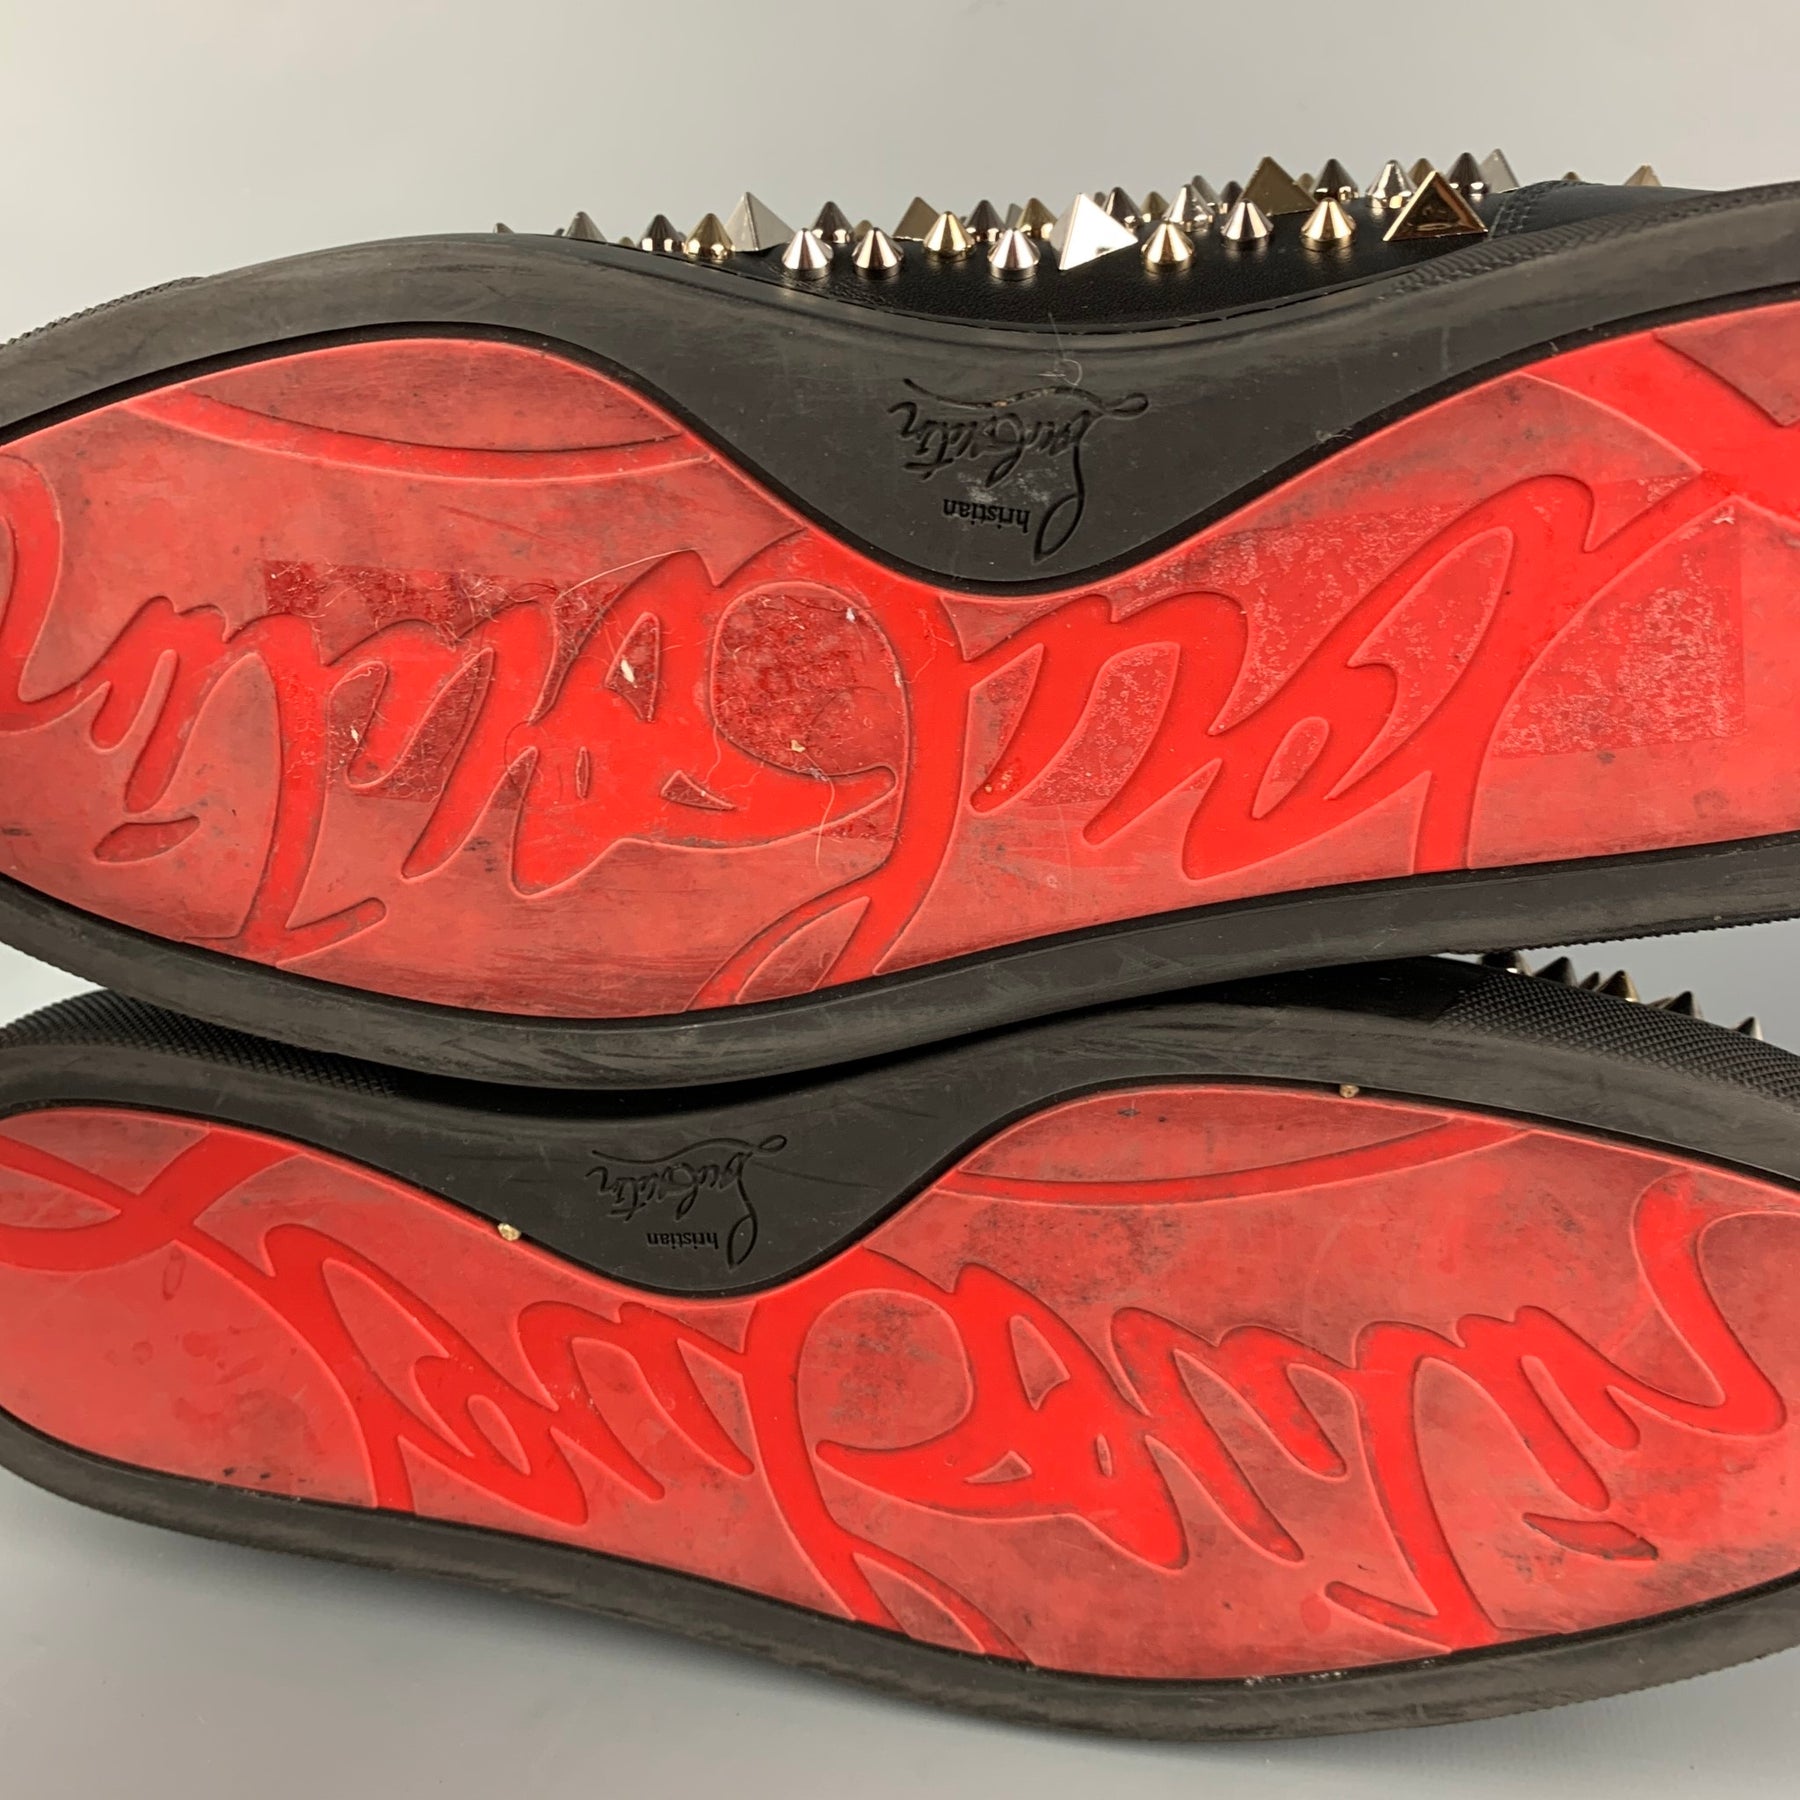 Christian Louboutin, Shoes, Christian Louboutin Flat Calflaminato Dino  Spikes Size 465 Black And Gold